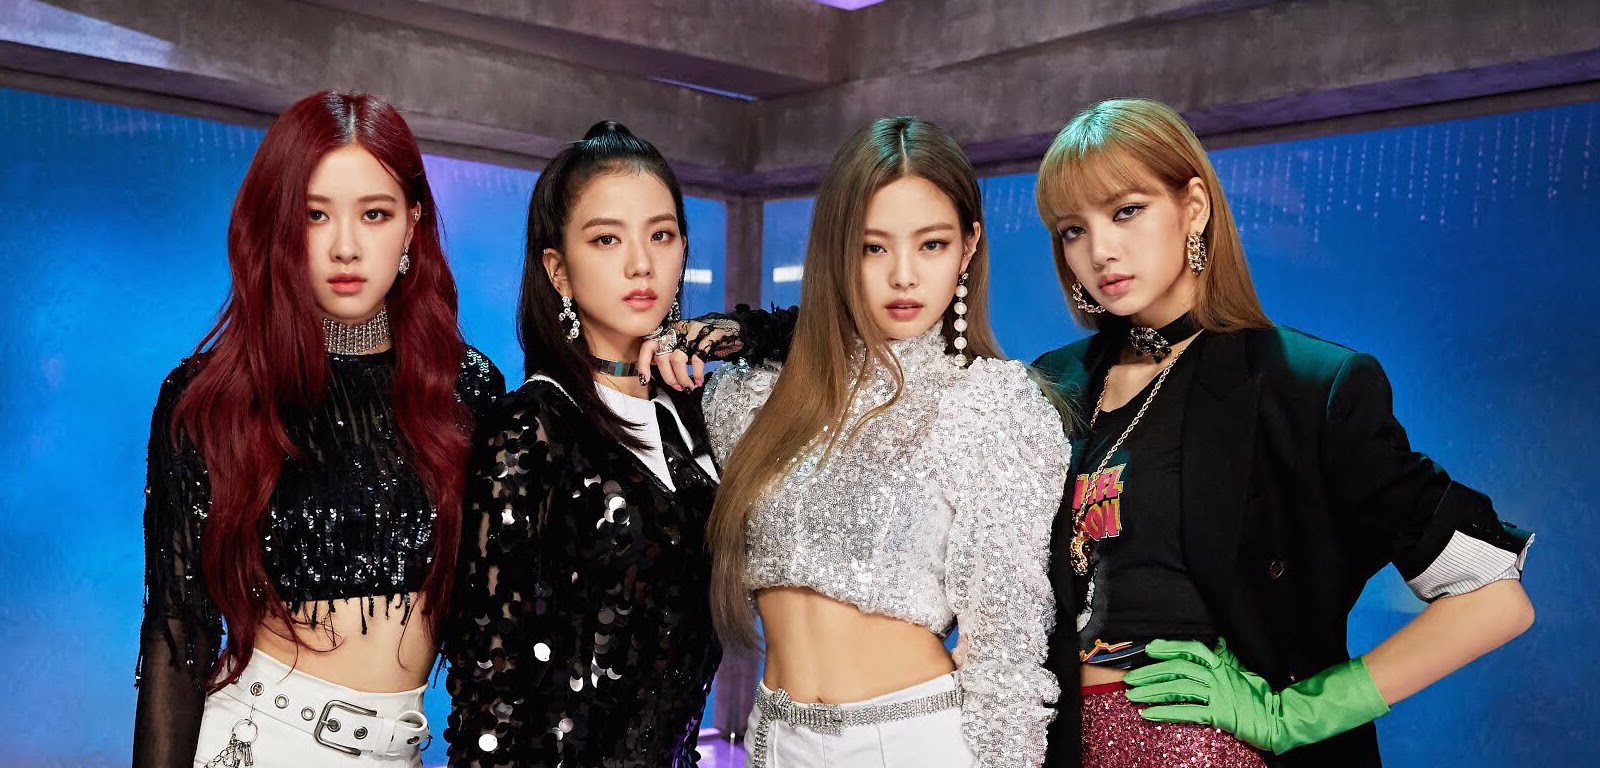 BLACKPINK Is The First Female K-Pop Act To Enter Official UK Top 40